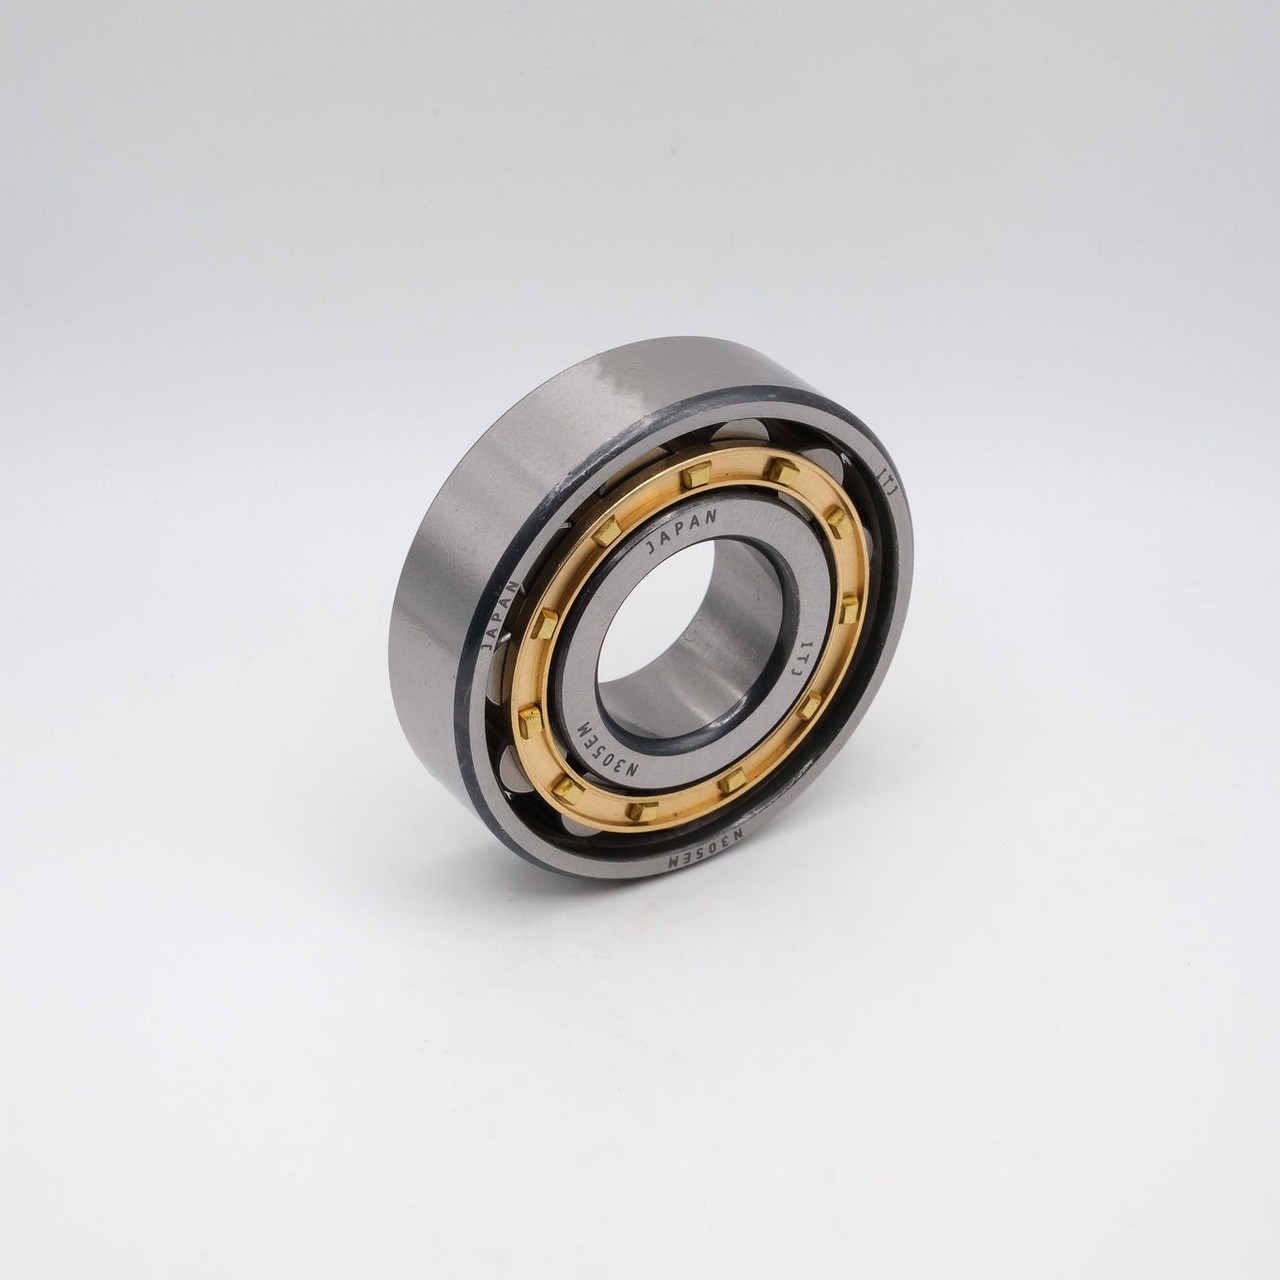 NU312EMC3 Cylindrical Roller Bearing Brass Cage 60x130x31mm Front Left Angled View